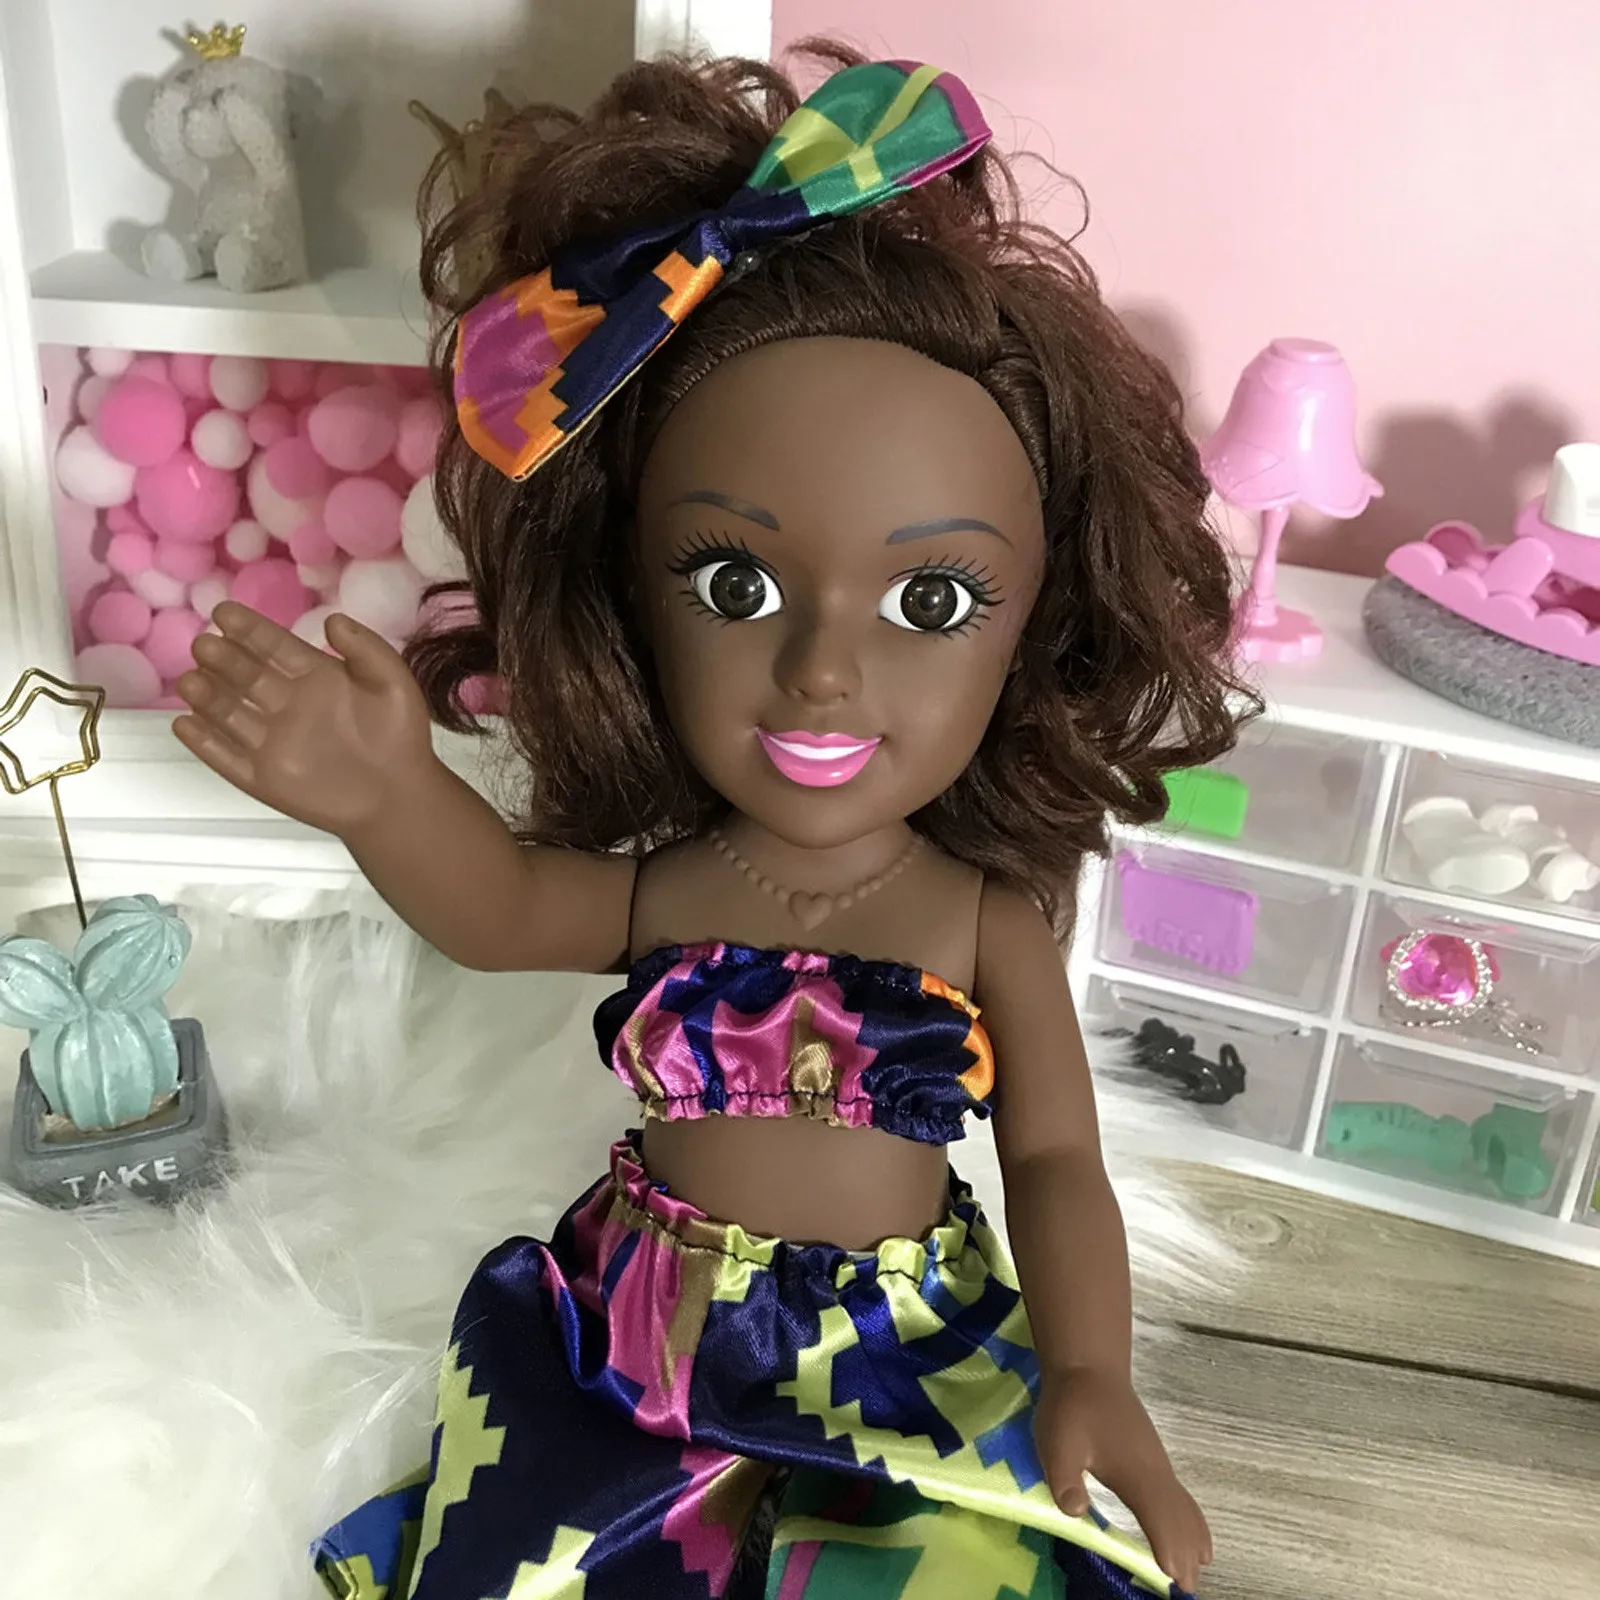 2021 New Baby Dolls For Girls Baby African Doll Toy Black Doll Best Gift Toy Hot Sale Baby Dolls For Kids Toys